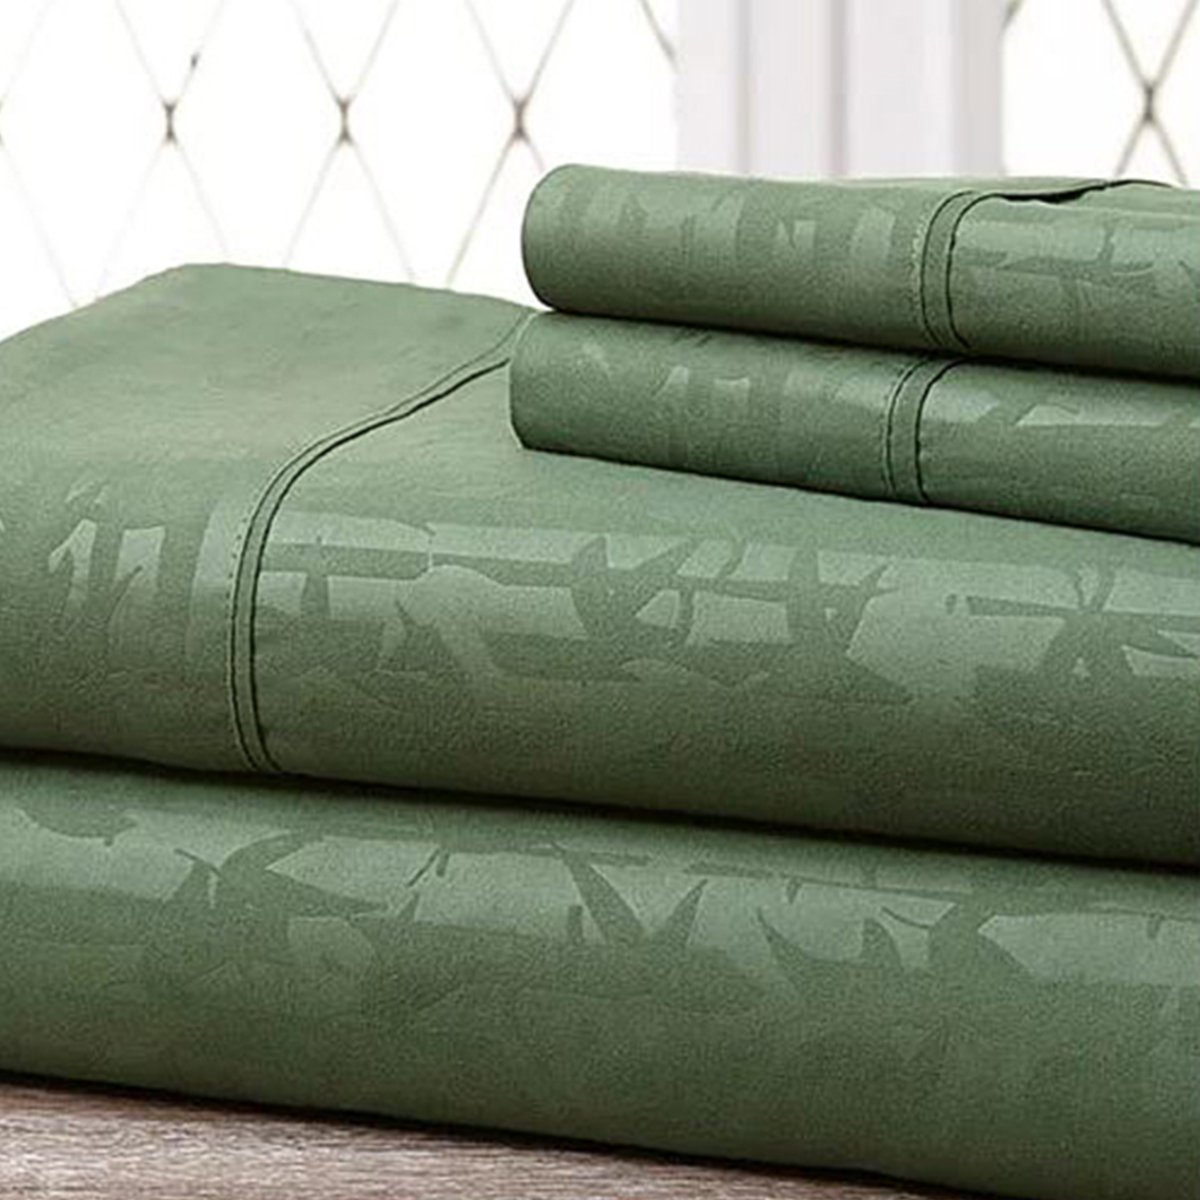 Hny-4pc-eb-hun-q Super-soft 1600 Series Bamboo Embossed Bed Sheet, Hunter Green - Queen, 4 Piece